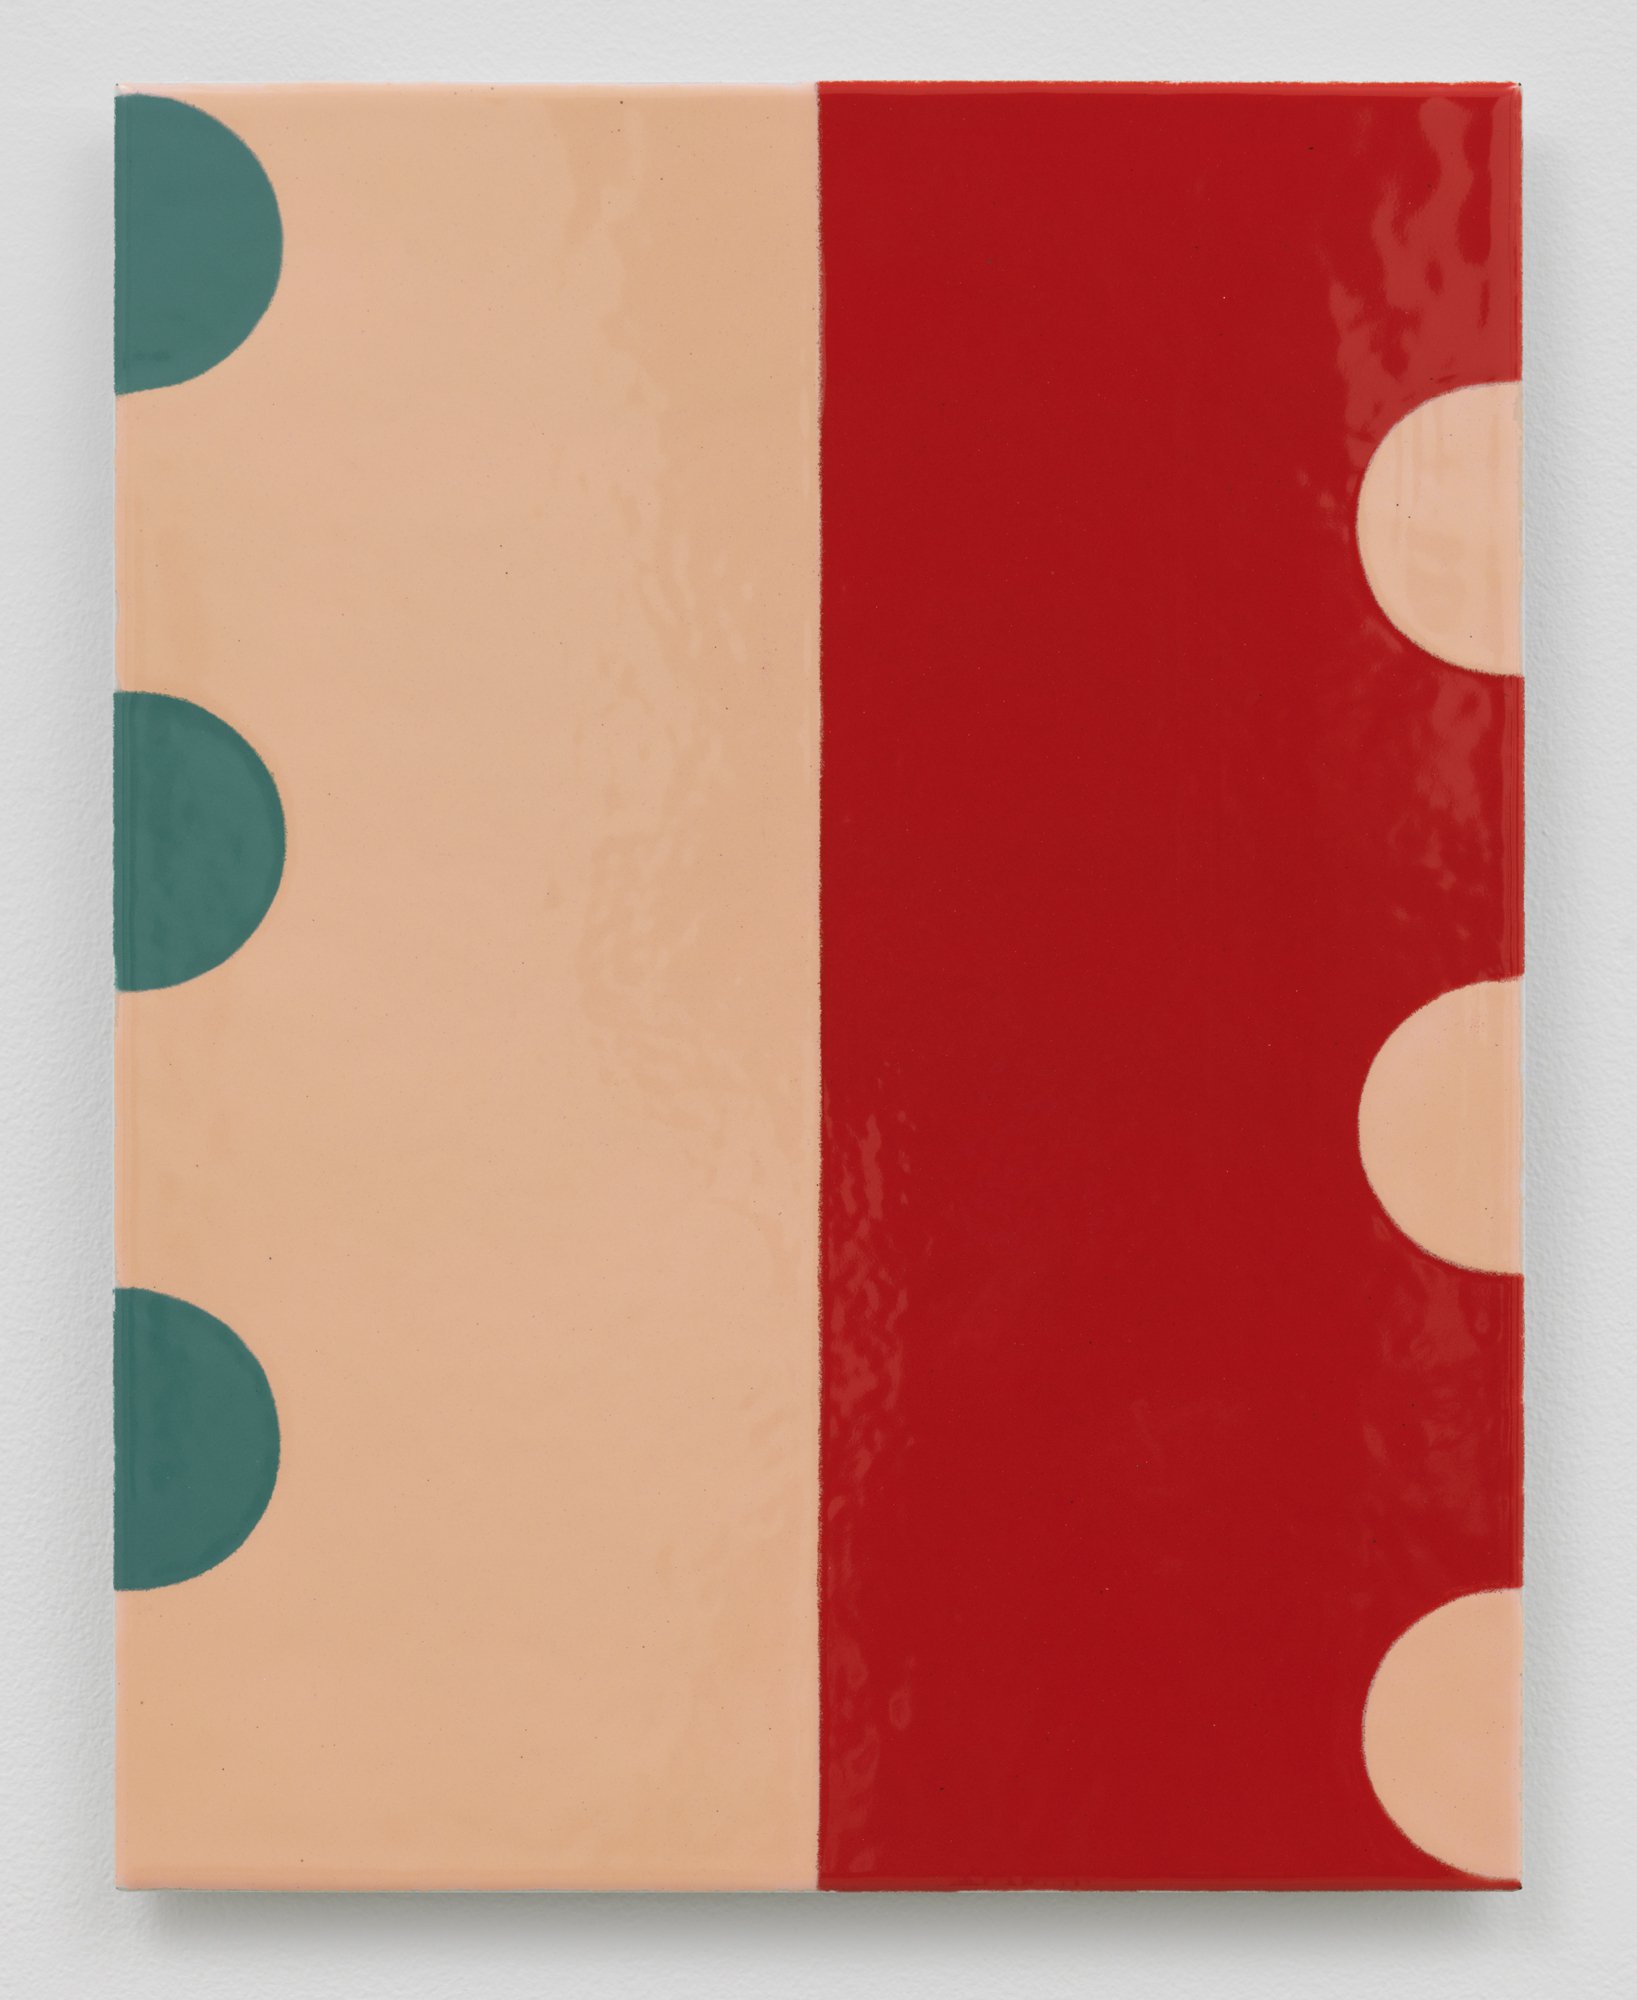 Ulrike Müller, Container, vitreous enamel on steel, 39.4 x 30.5 cm (15 1/2 x 12 1/8 in), 2019